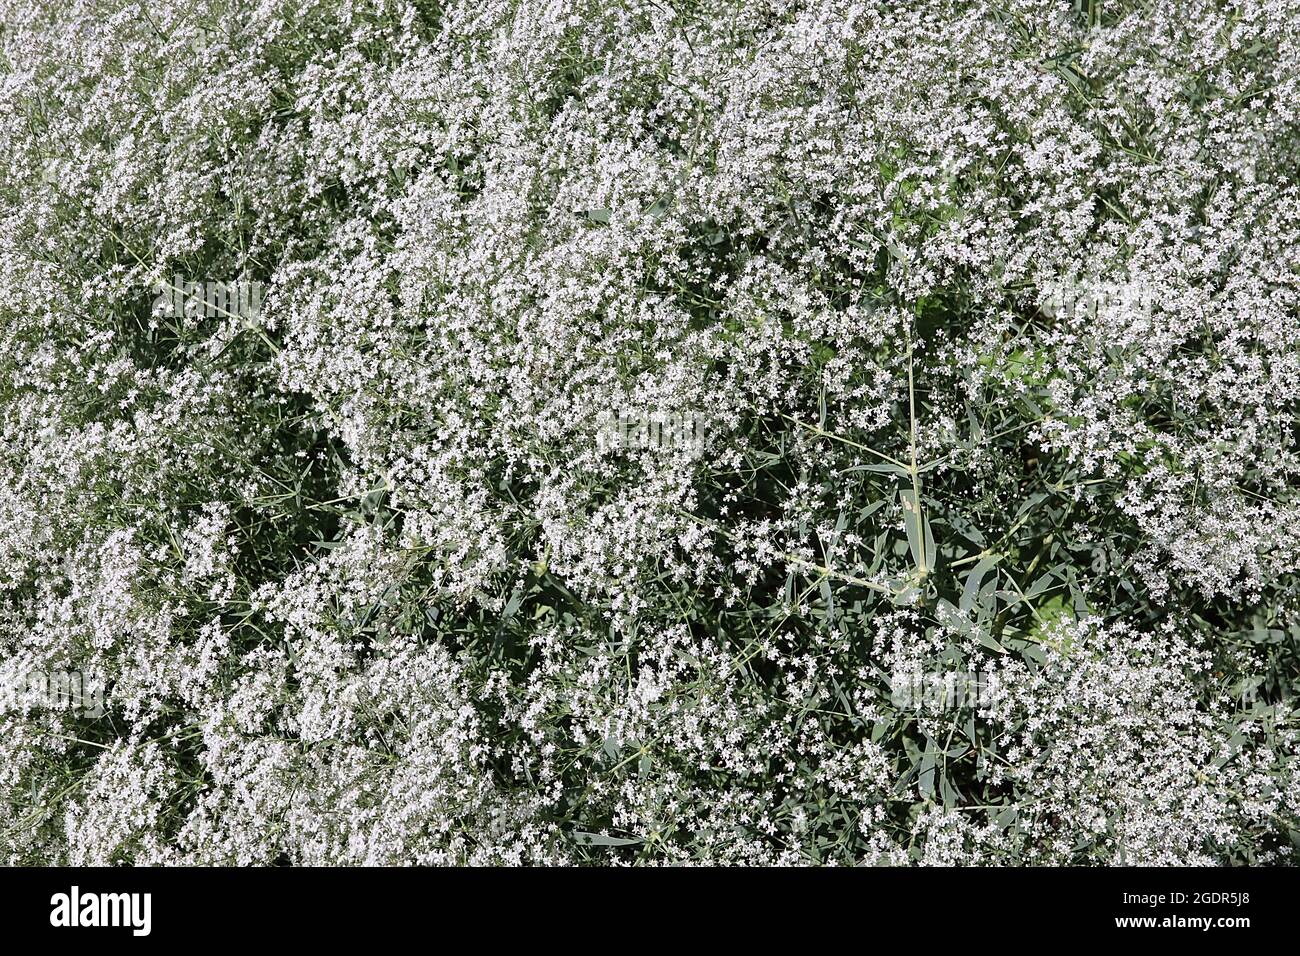 Gypsophila paniculata ‘Alba’ baby’s breath – cloud-like clusters of tiny white flowers and grey green narrow leaves,  July, England, UK Stock Photo